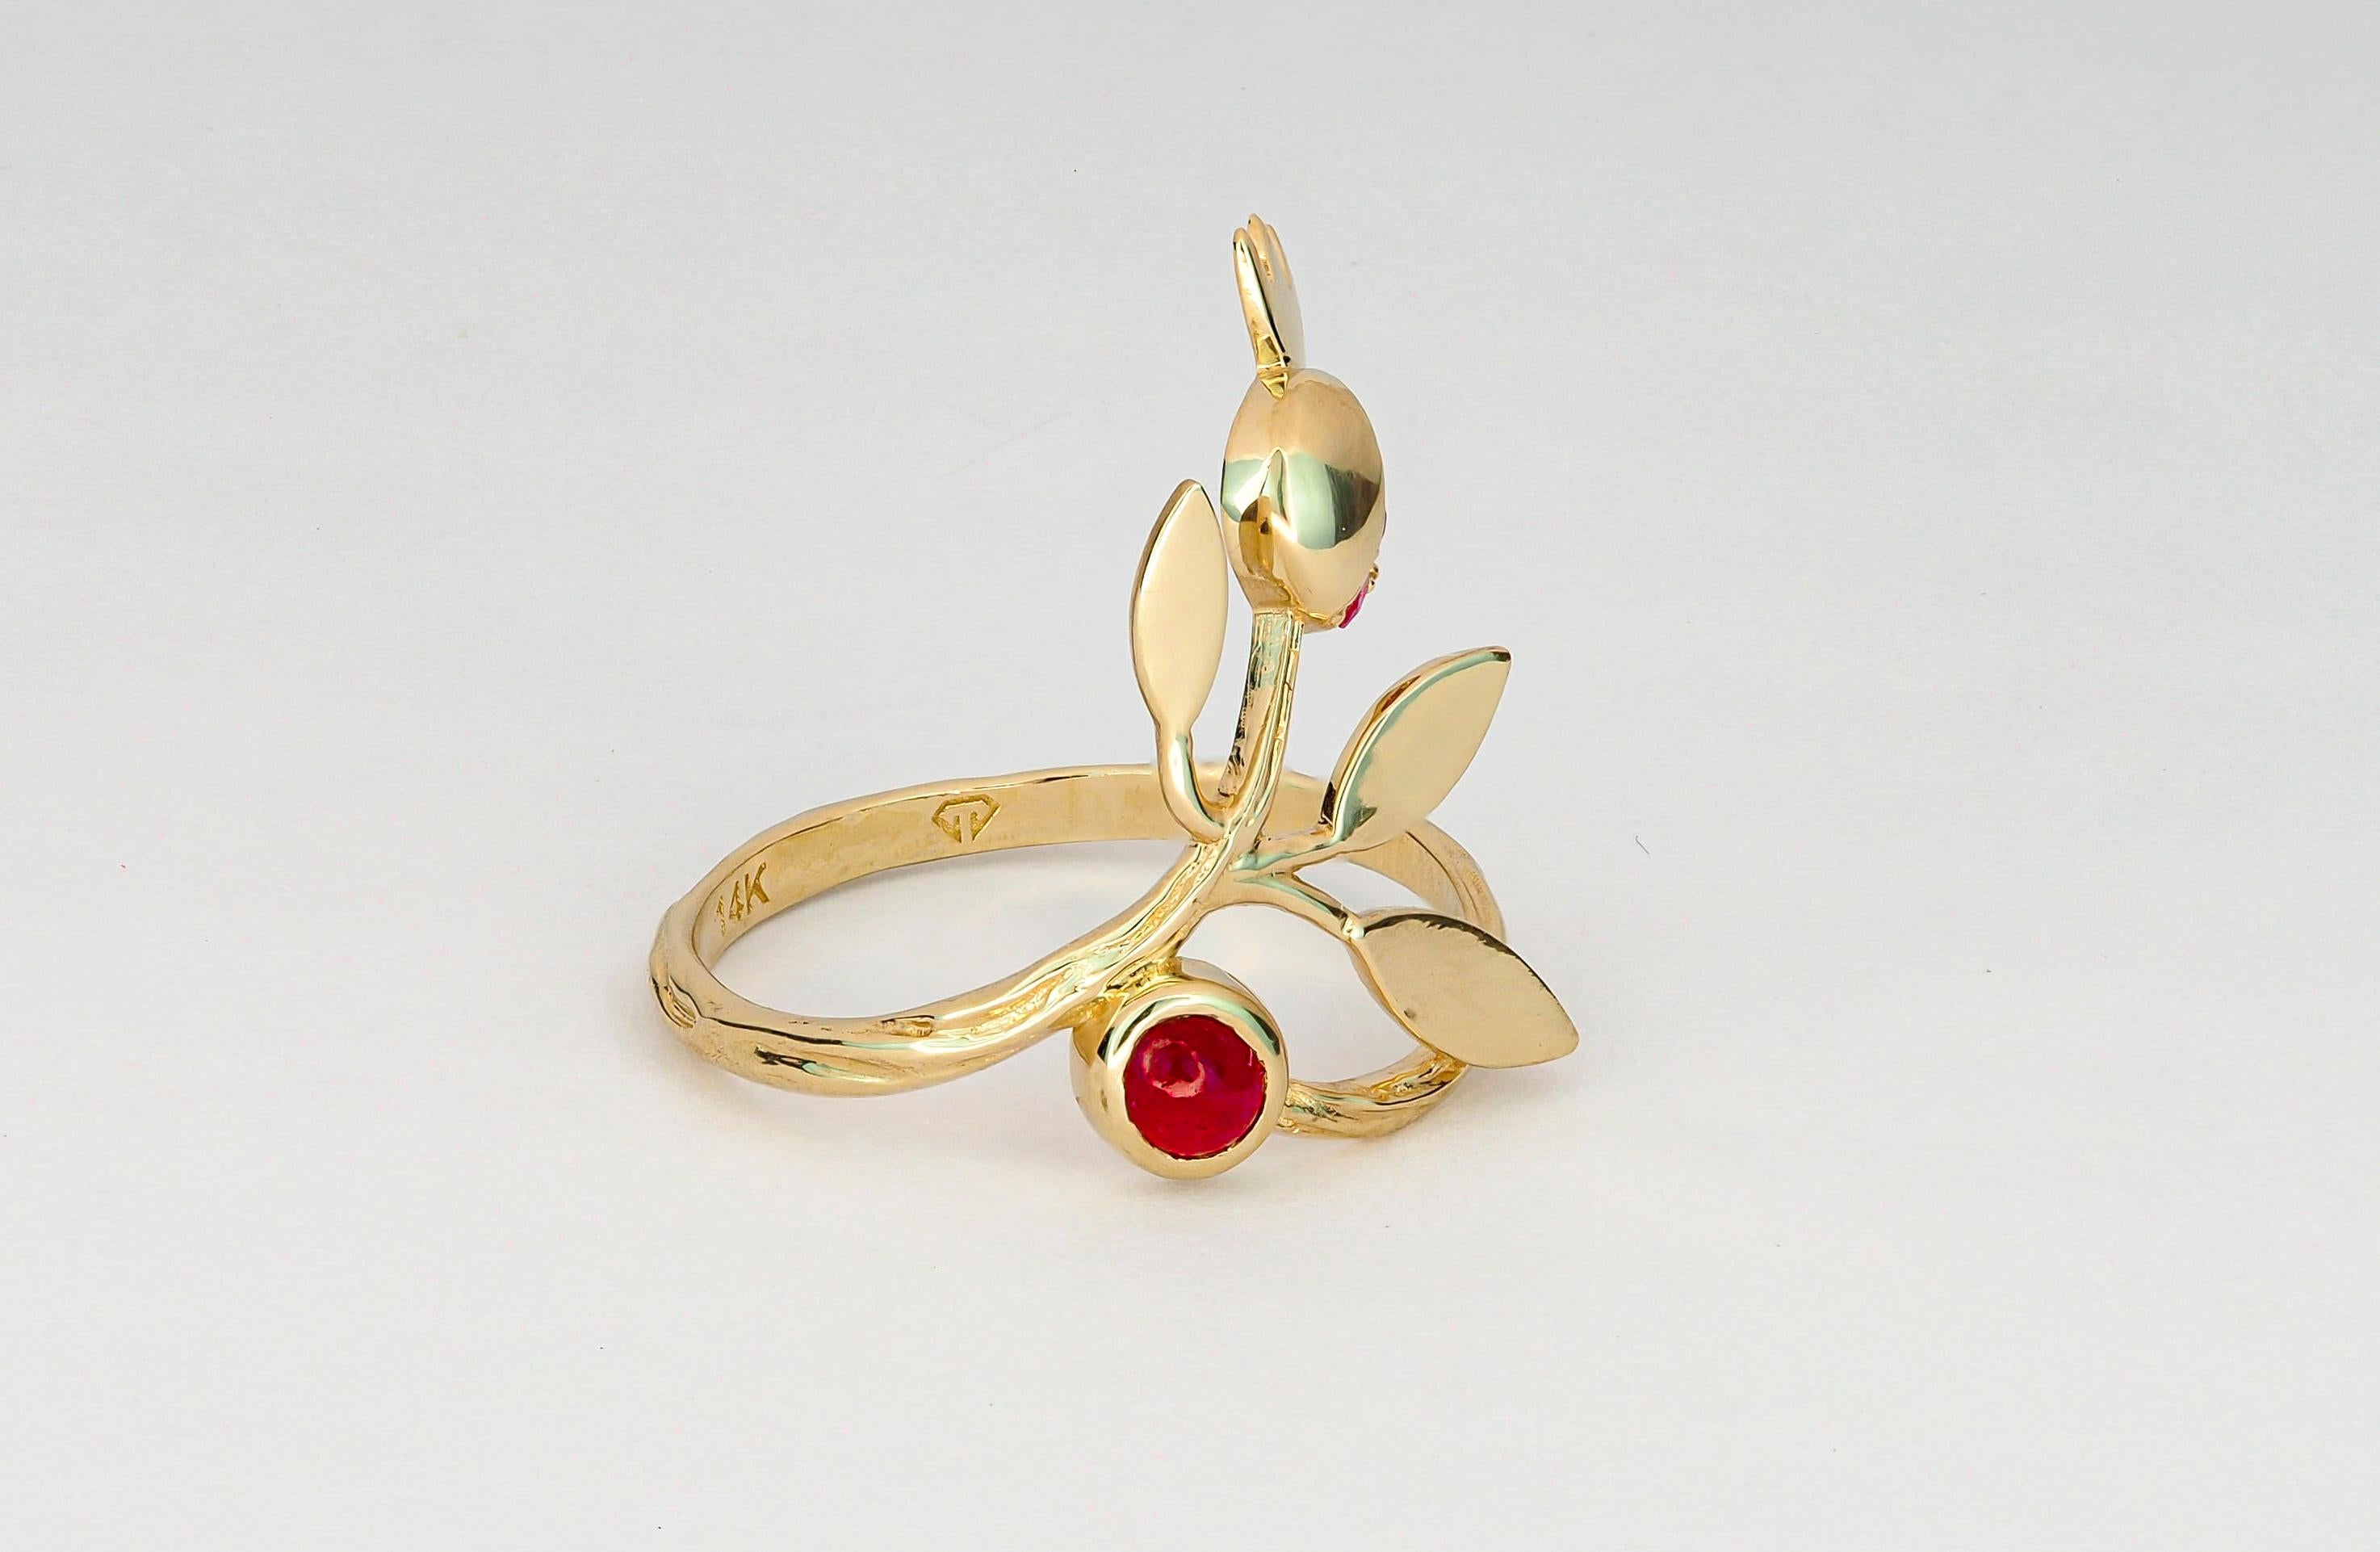 For Sale:  14 karat Gold Ring with Ruby, Sapphires. Pomegranate ring. July birthstone ring! 4